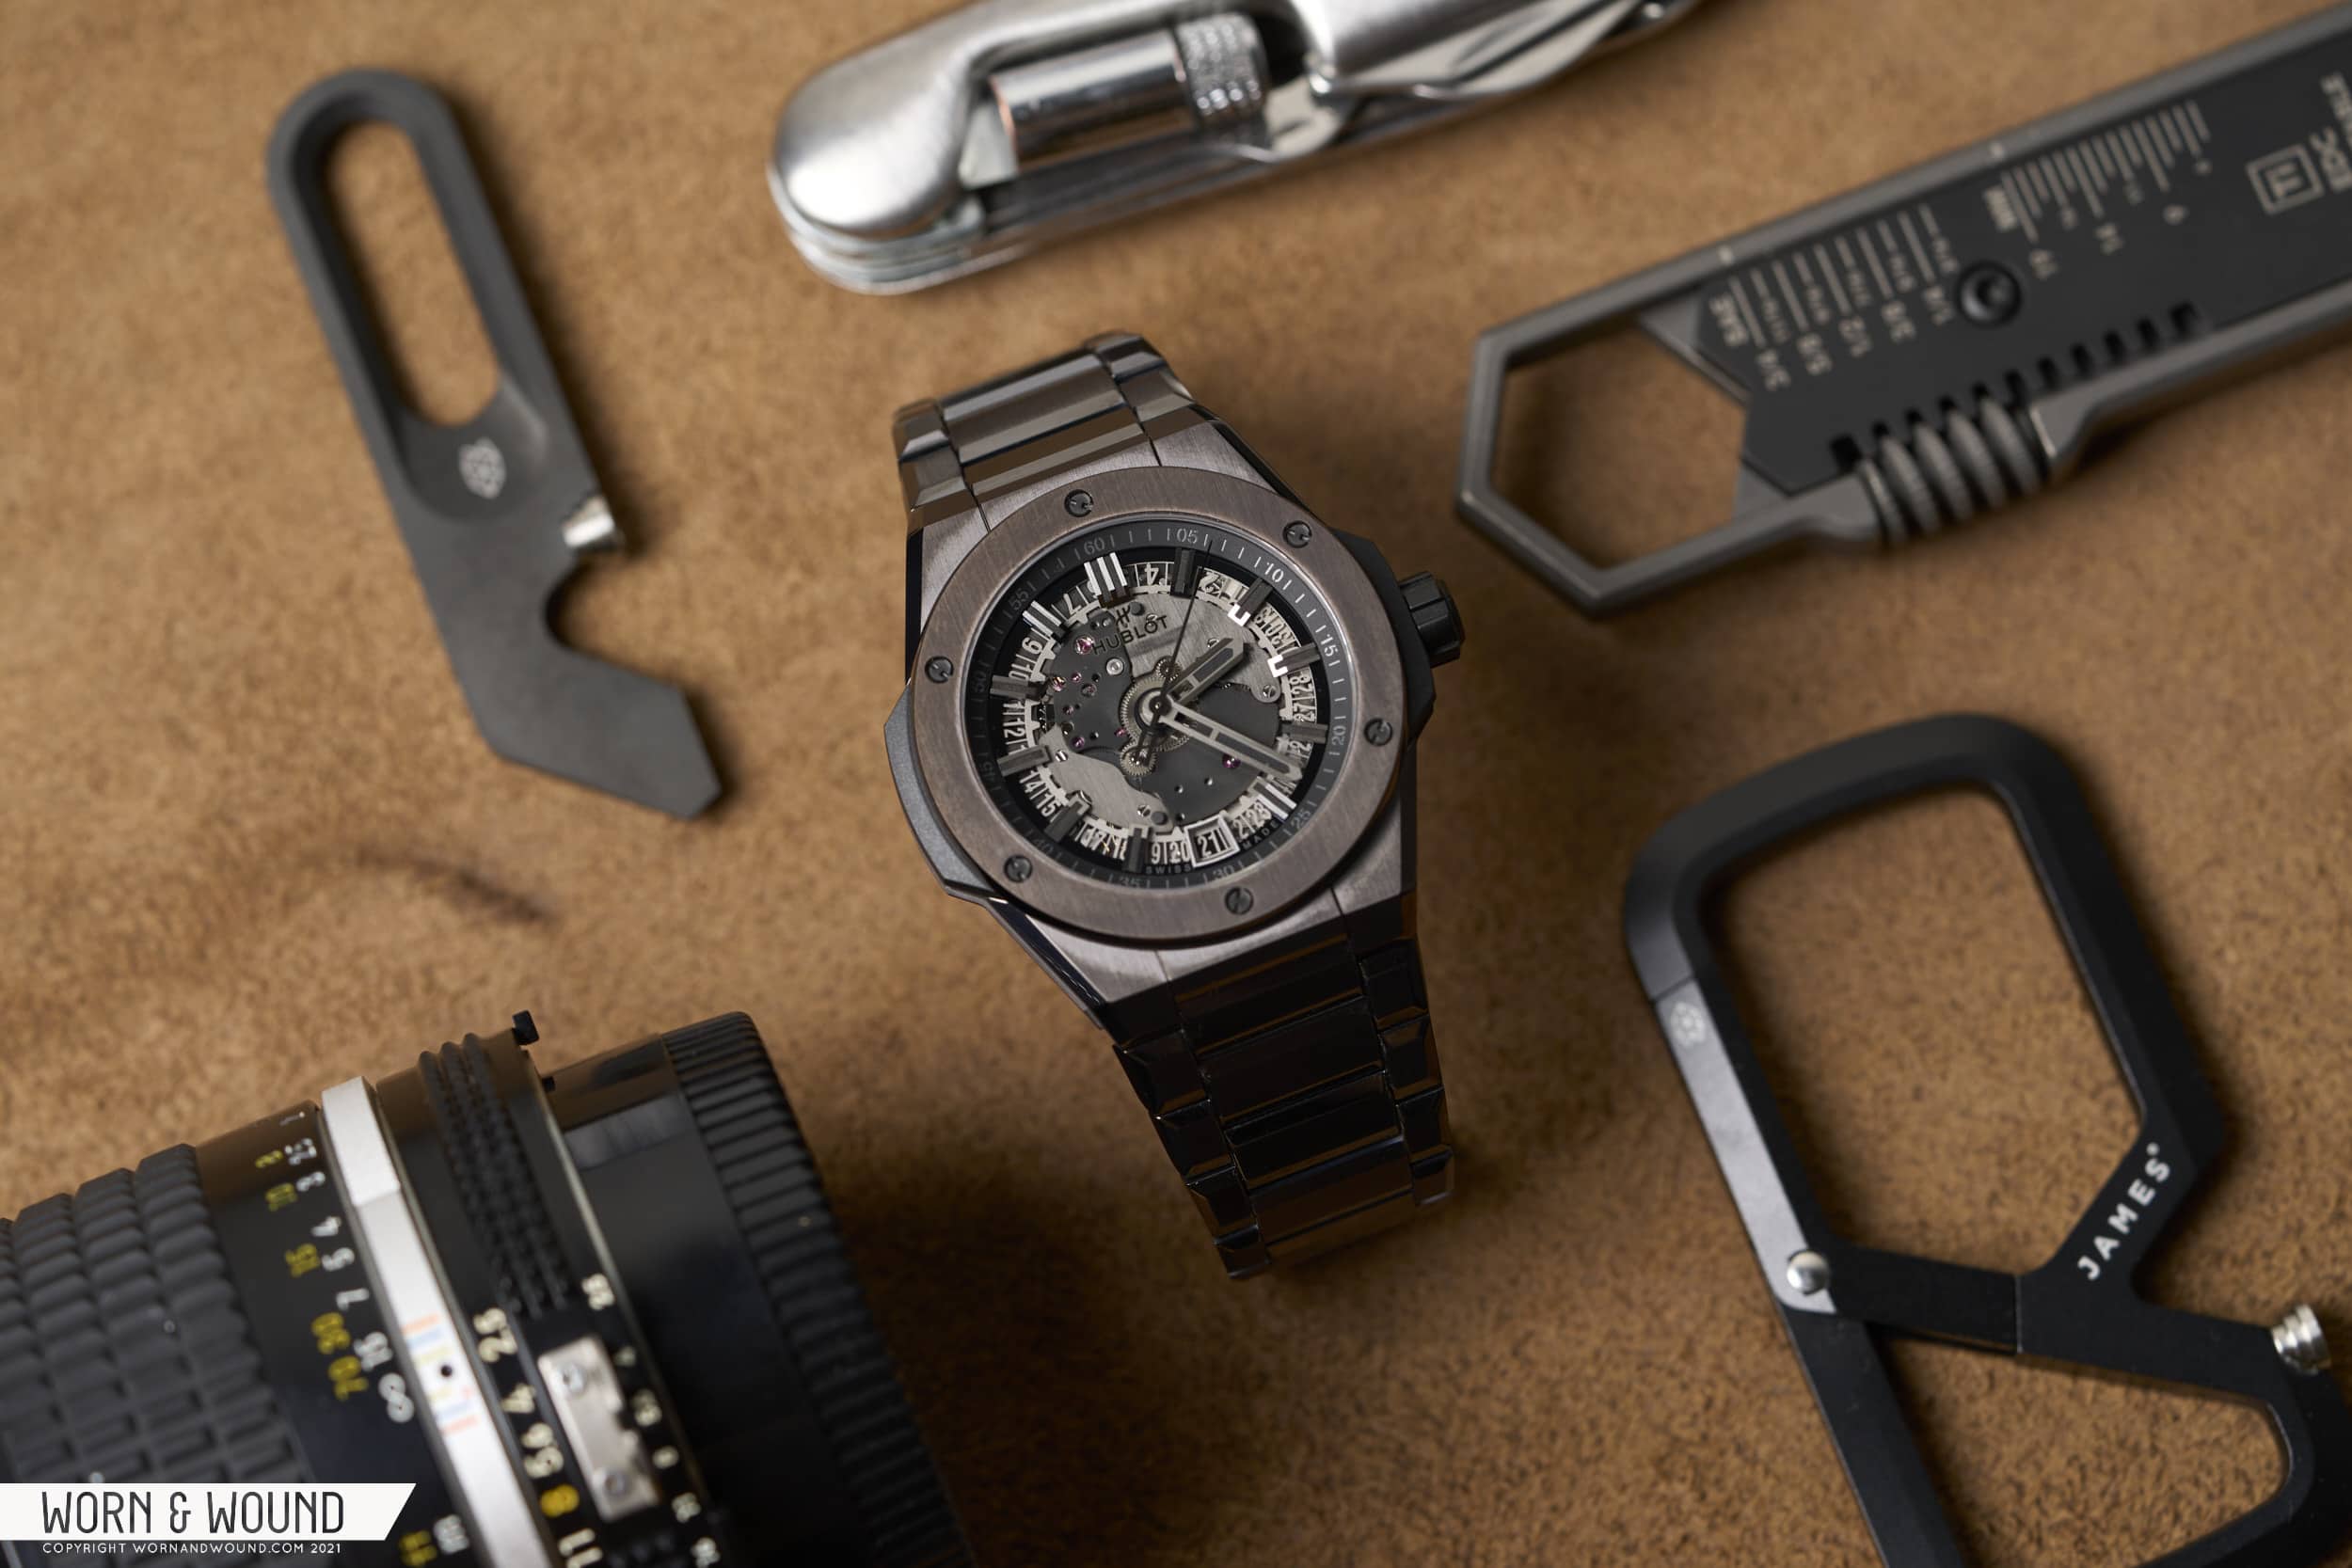 Hands-On: Hublot Big Bang Integral Time Only Watches